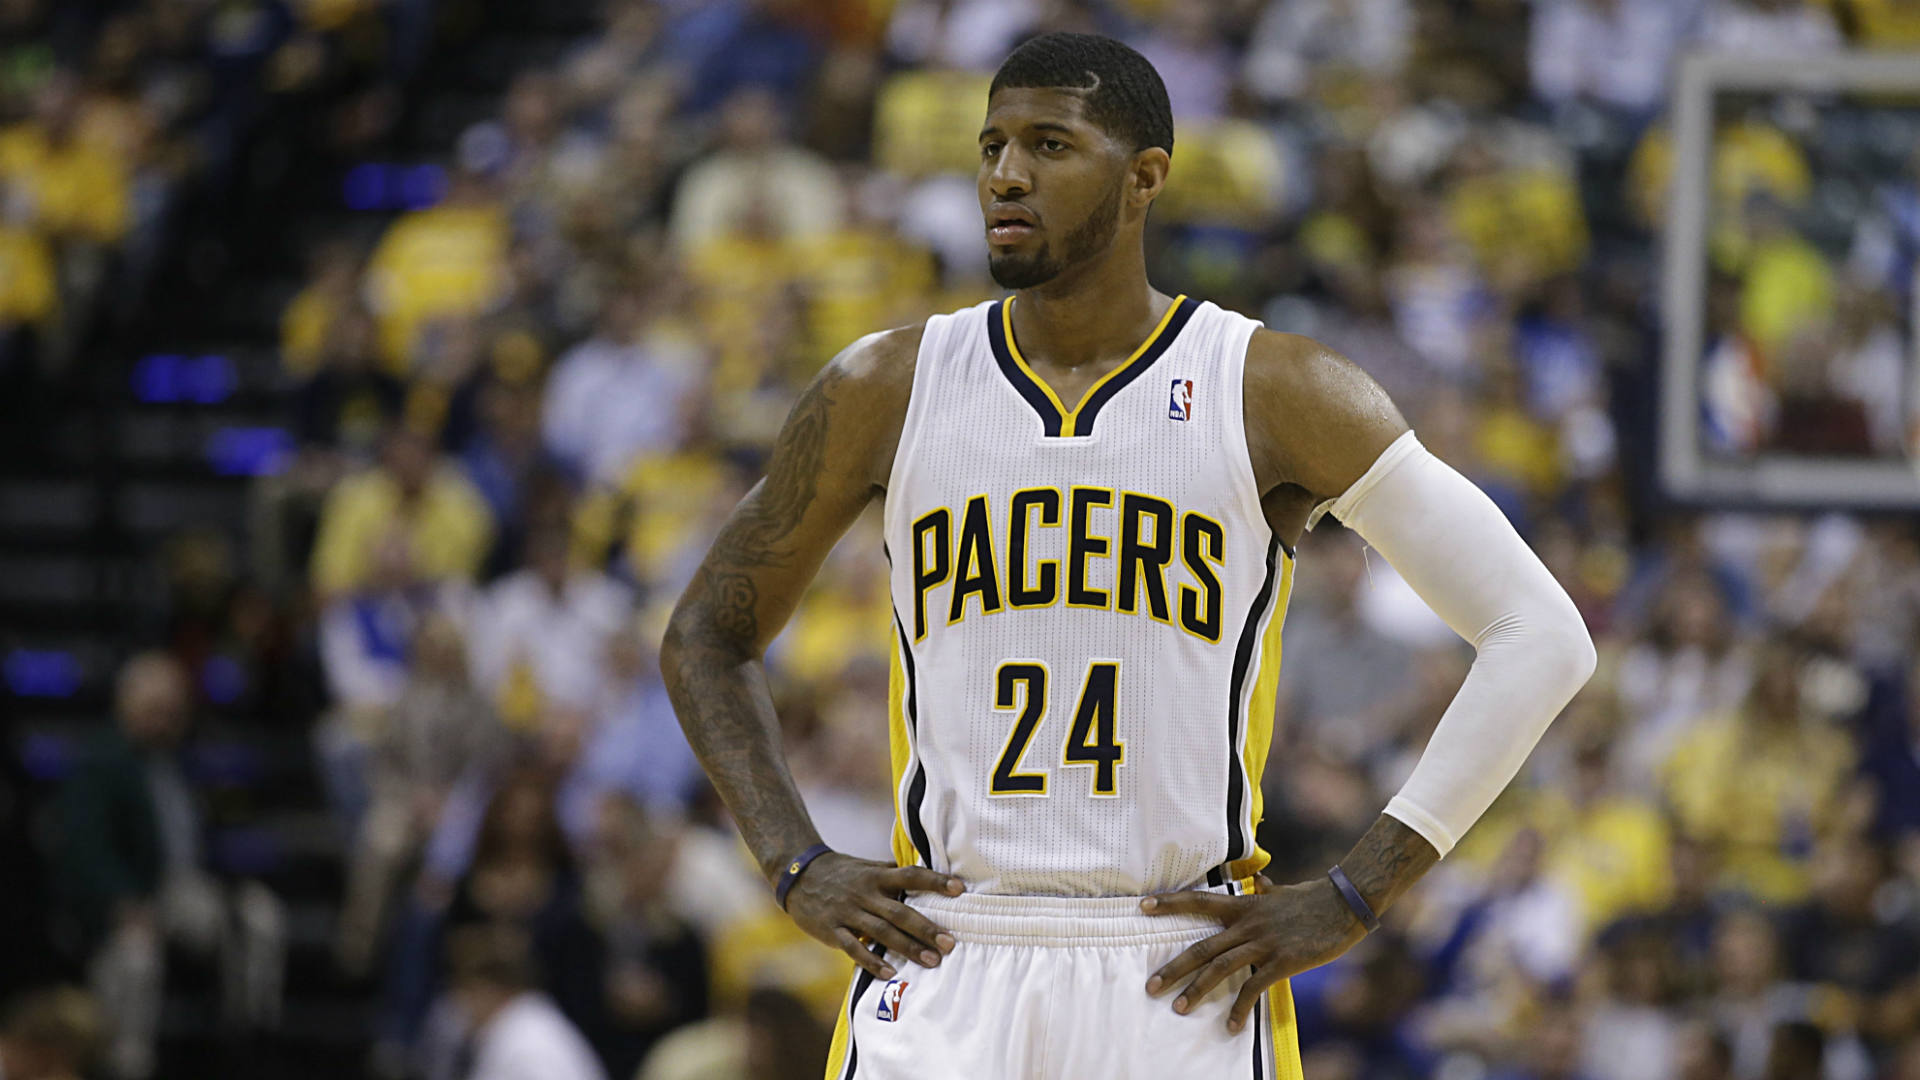 pacers paul george jersey